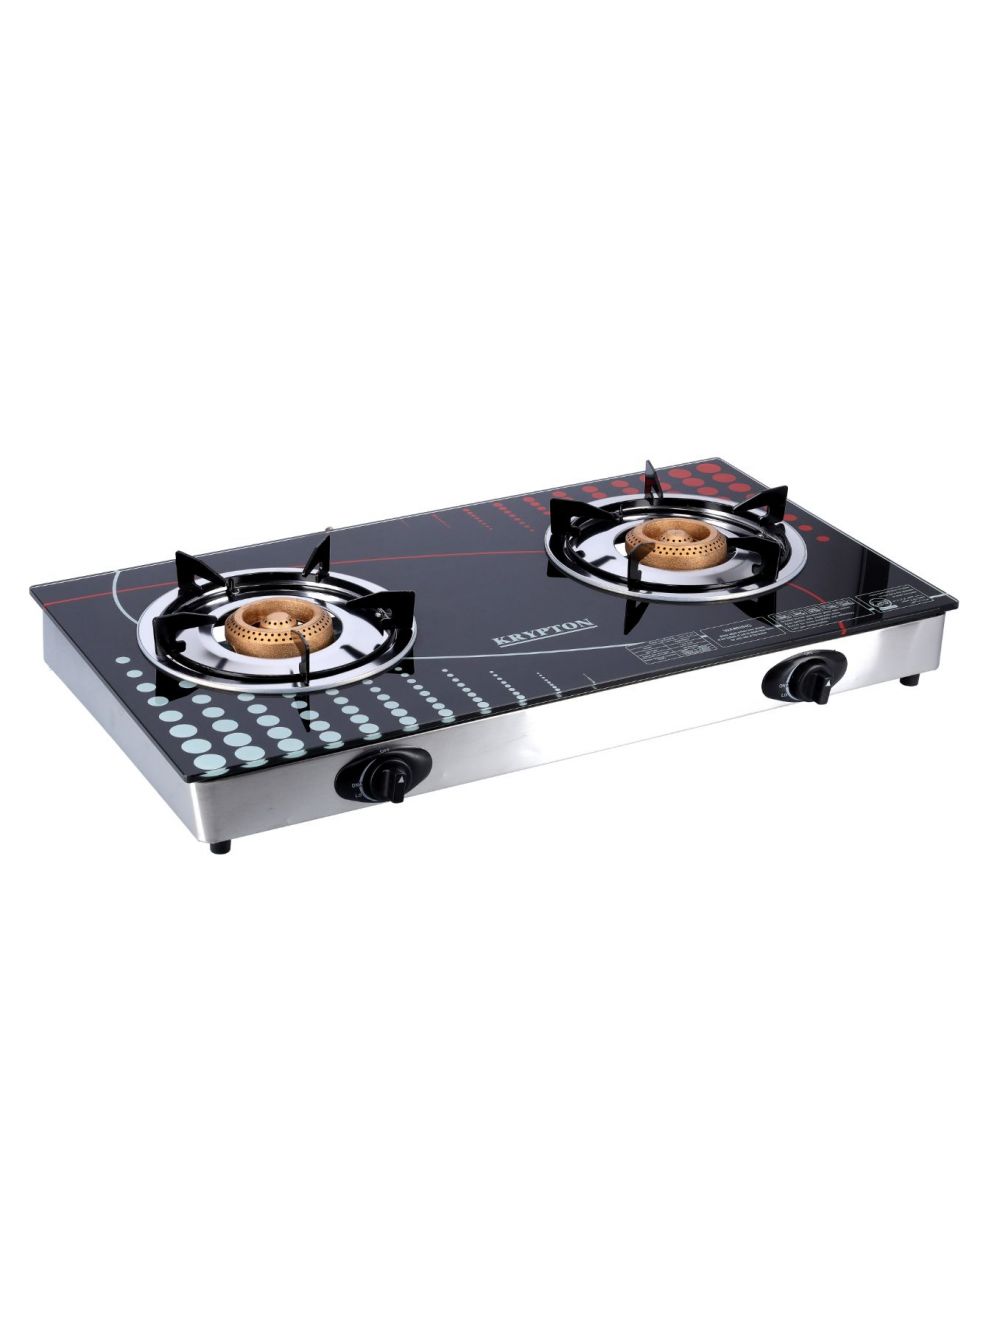 Krypton Tempered Glass Double Burner Gas Stove Auto Ignition Black